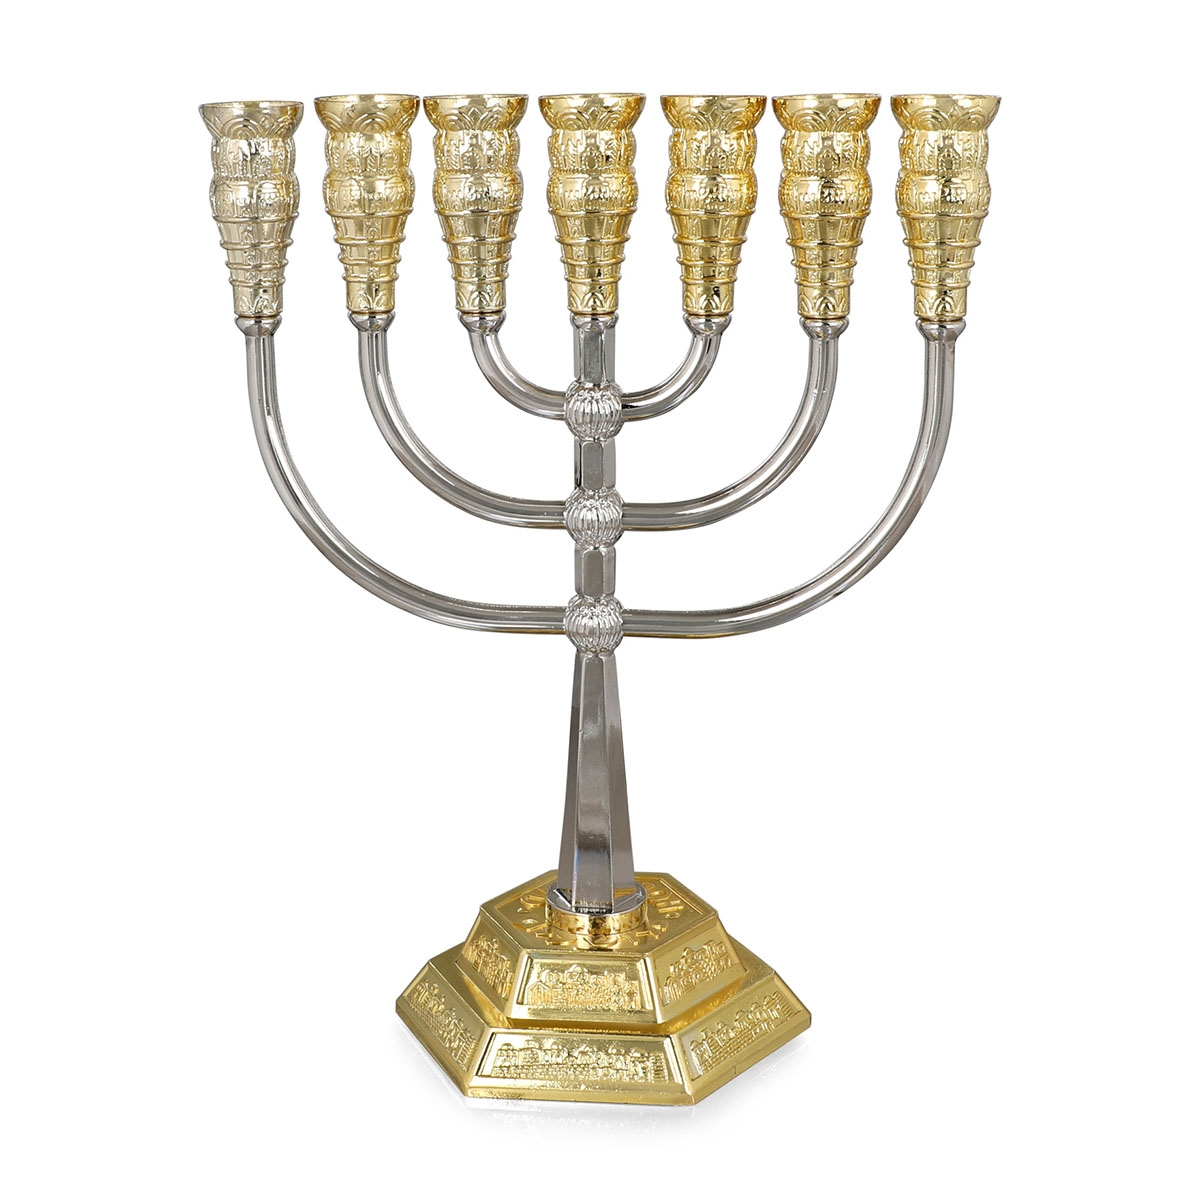 Chic Seven-Branched  Jerusalem Temple Menorah (Choice of Colors) - 1